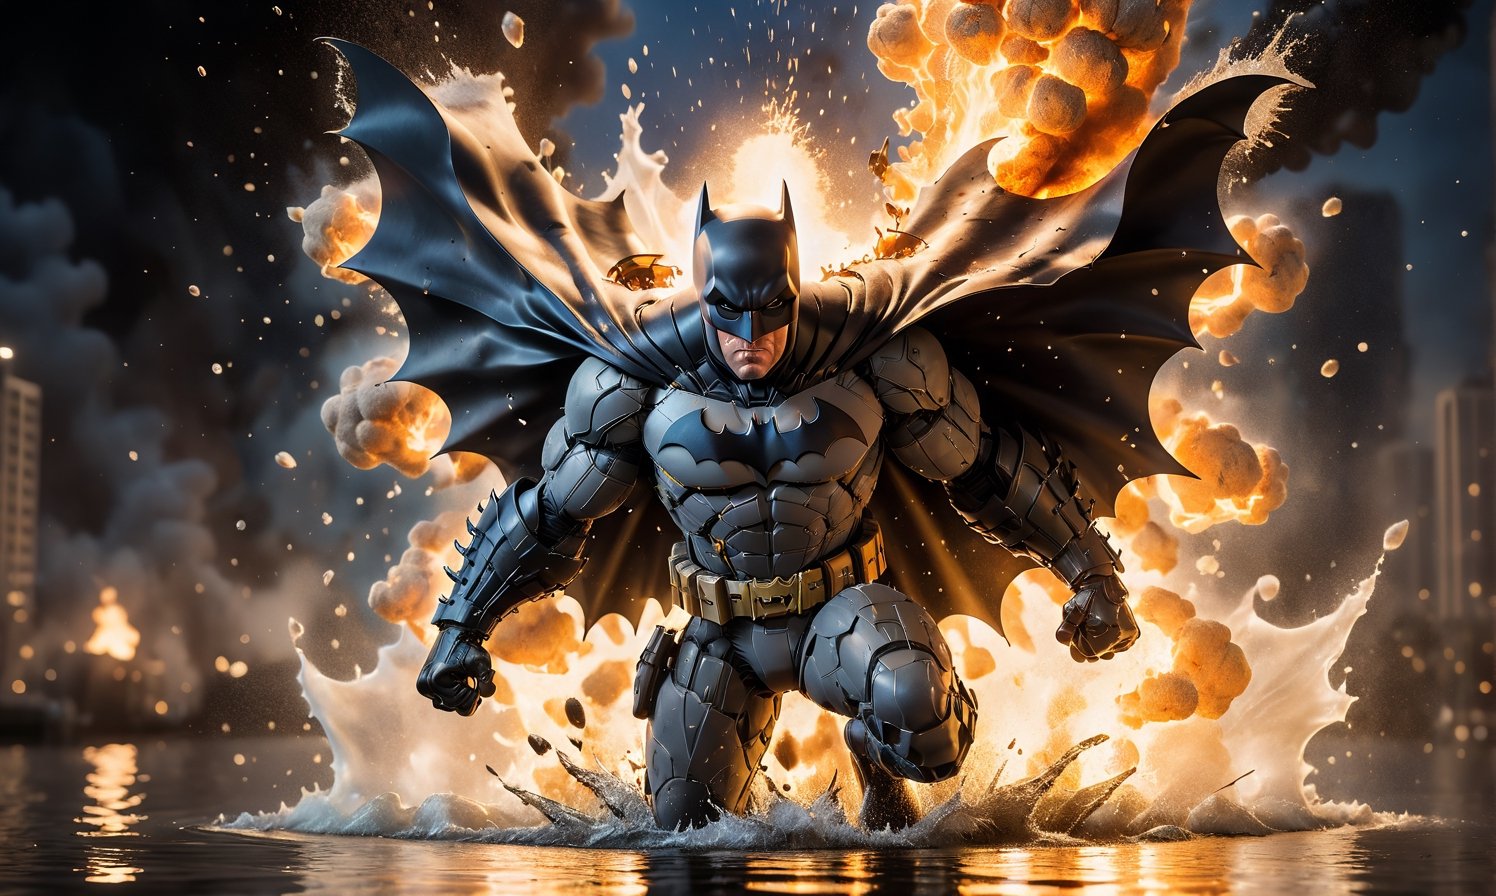 High-Speed Photography of [batman] charging through an exploding [water] , shrapnel and flames surrounding it. Backlit by a massive explosion, dusk, high dynamic range. Shot with Canon EOS 5D Mark IV, directed by Michael Bay
